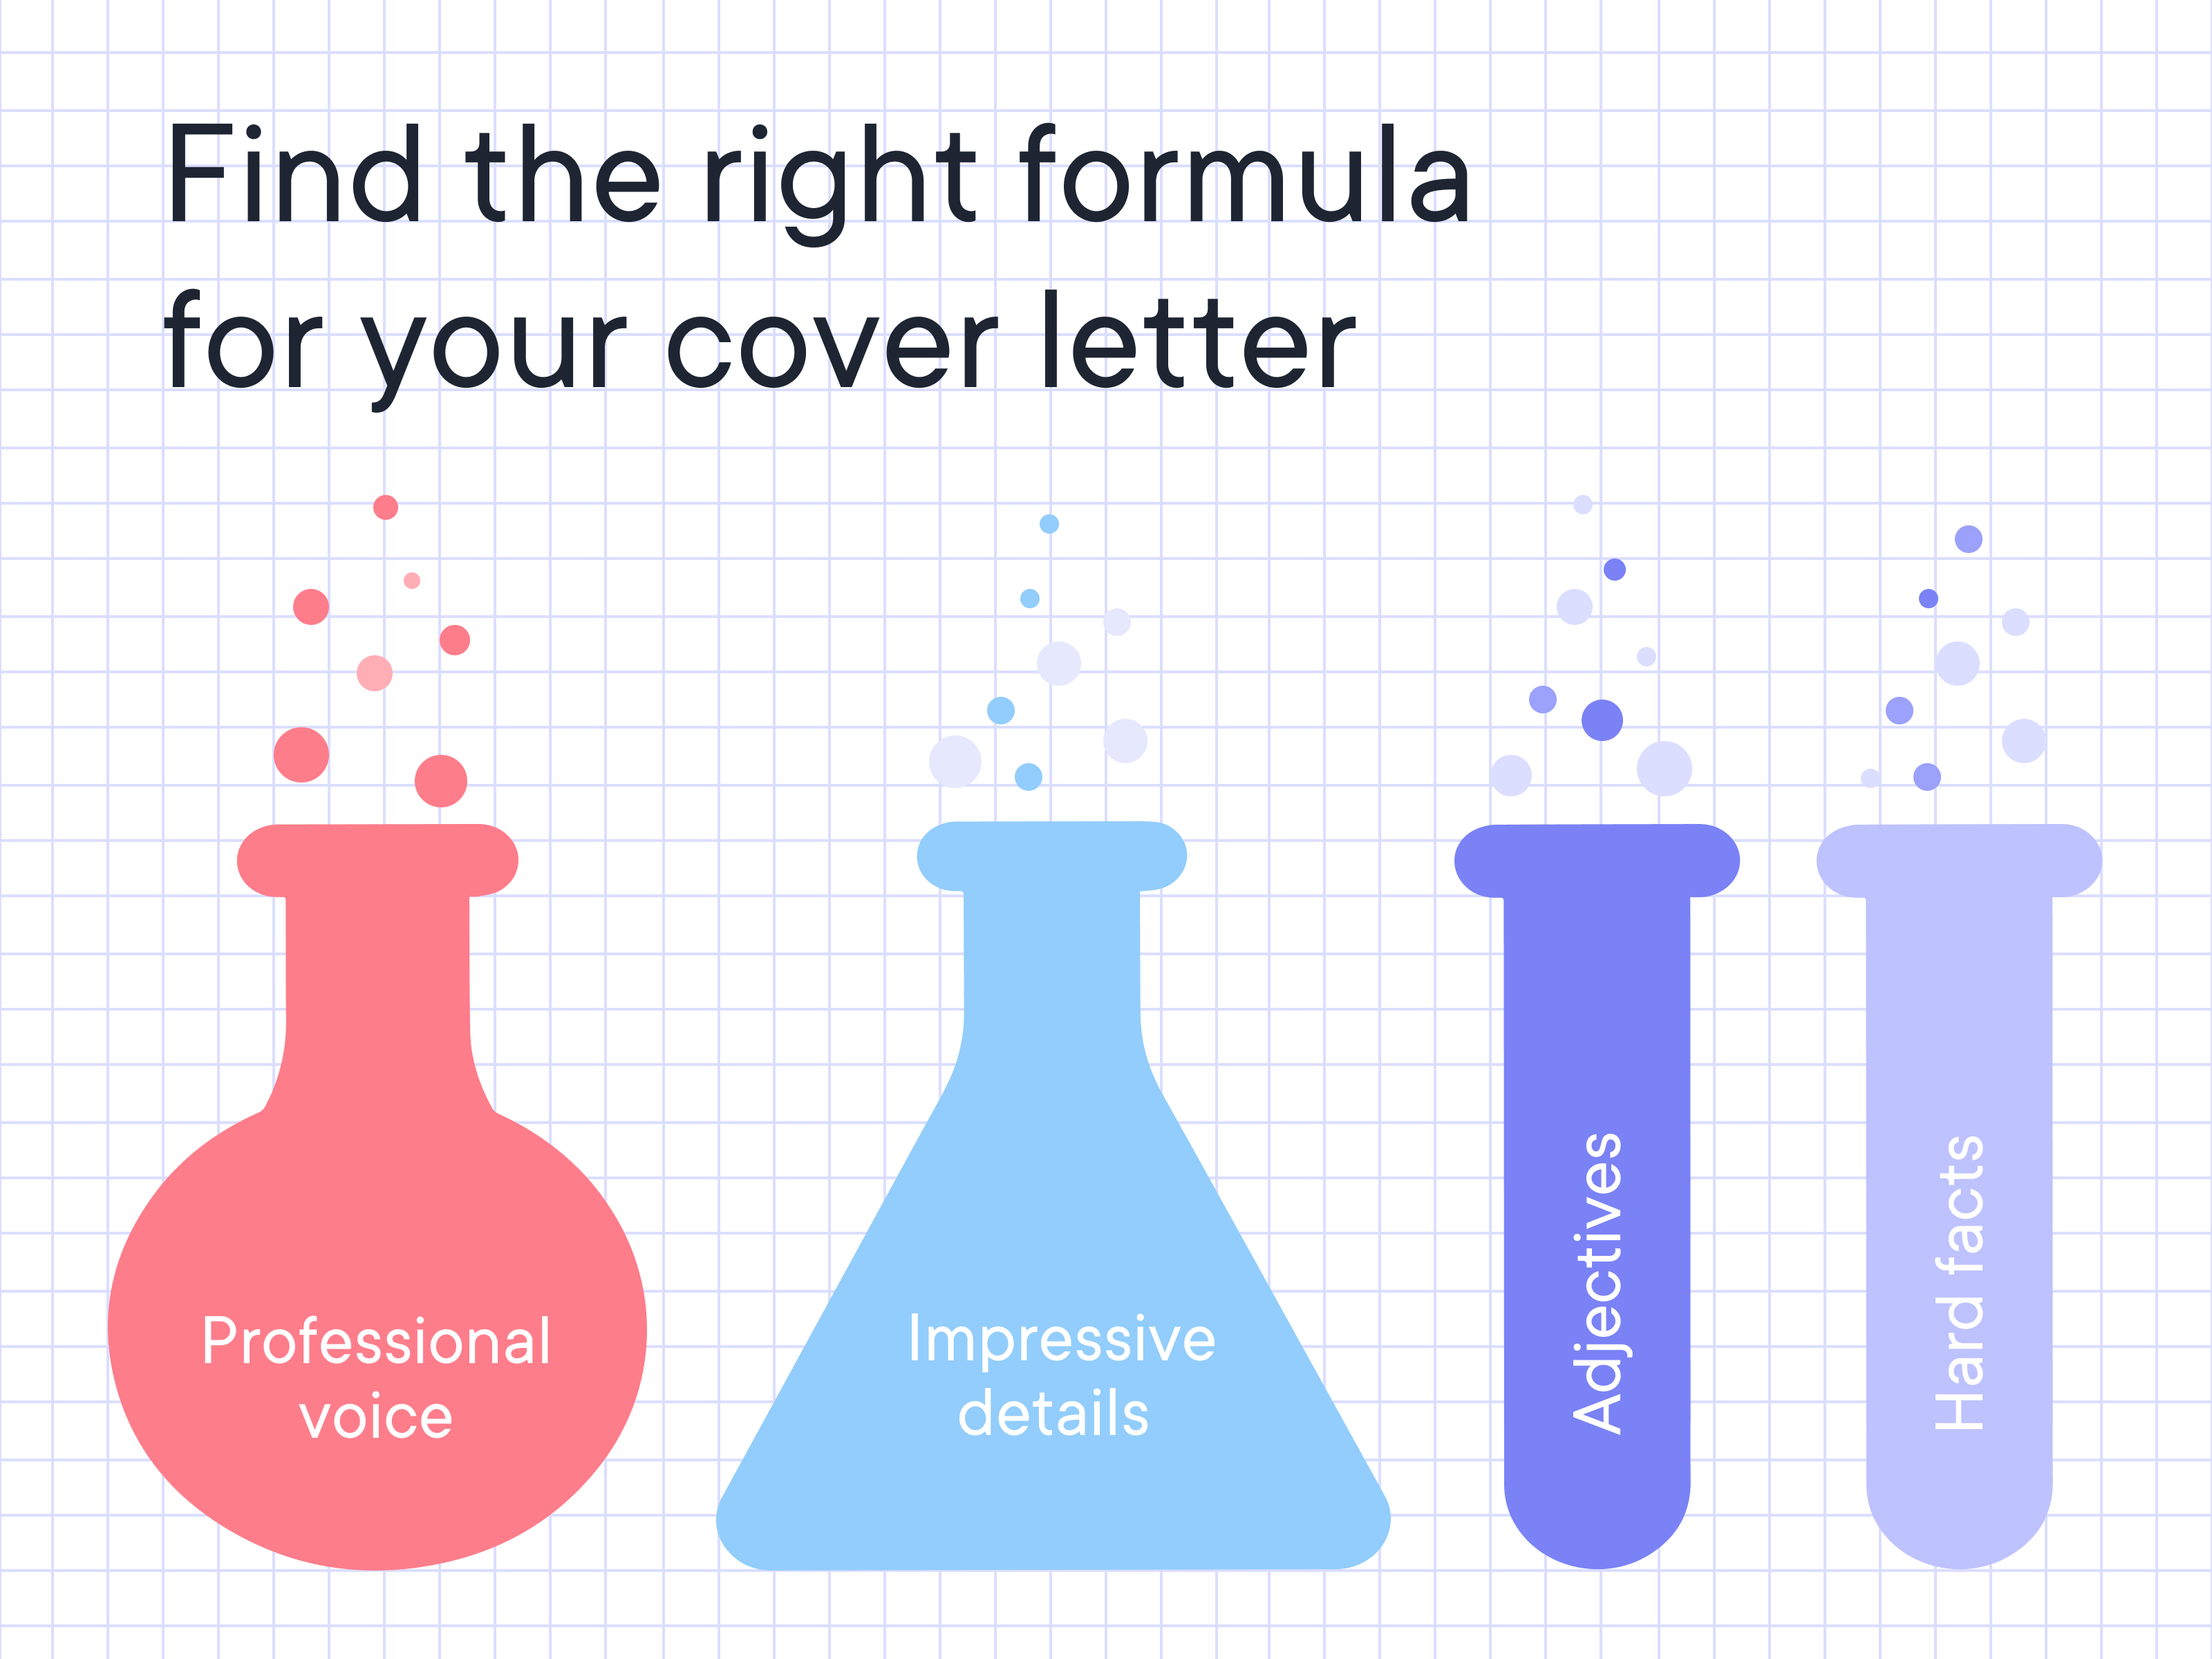 Find the right formula for your cover letter